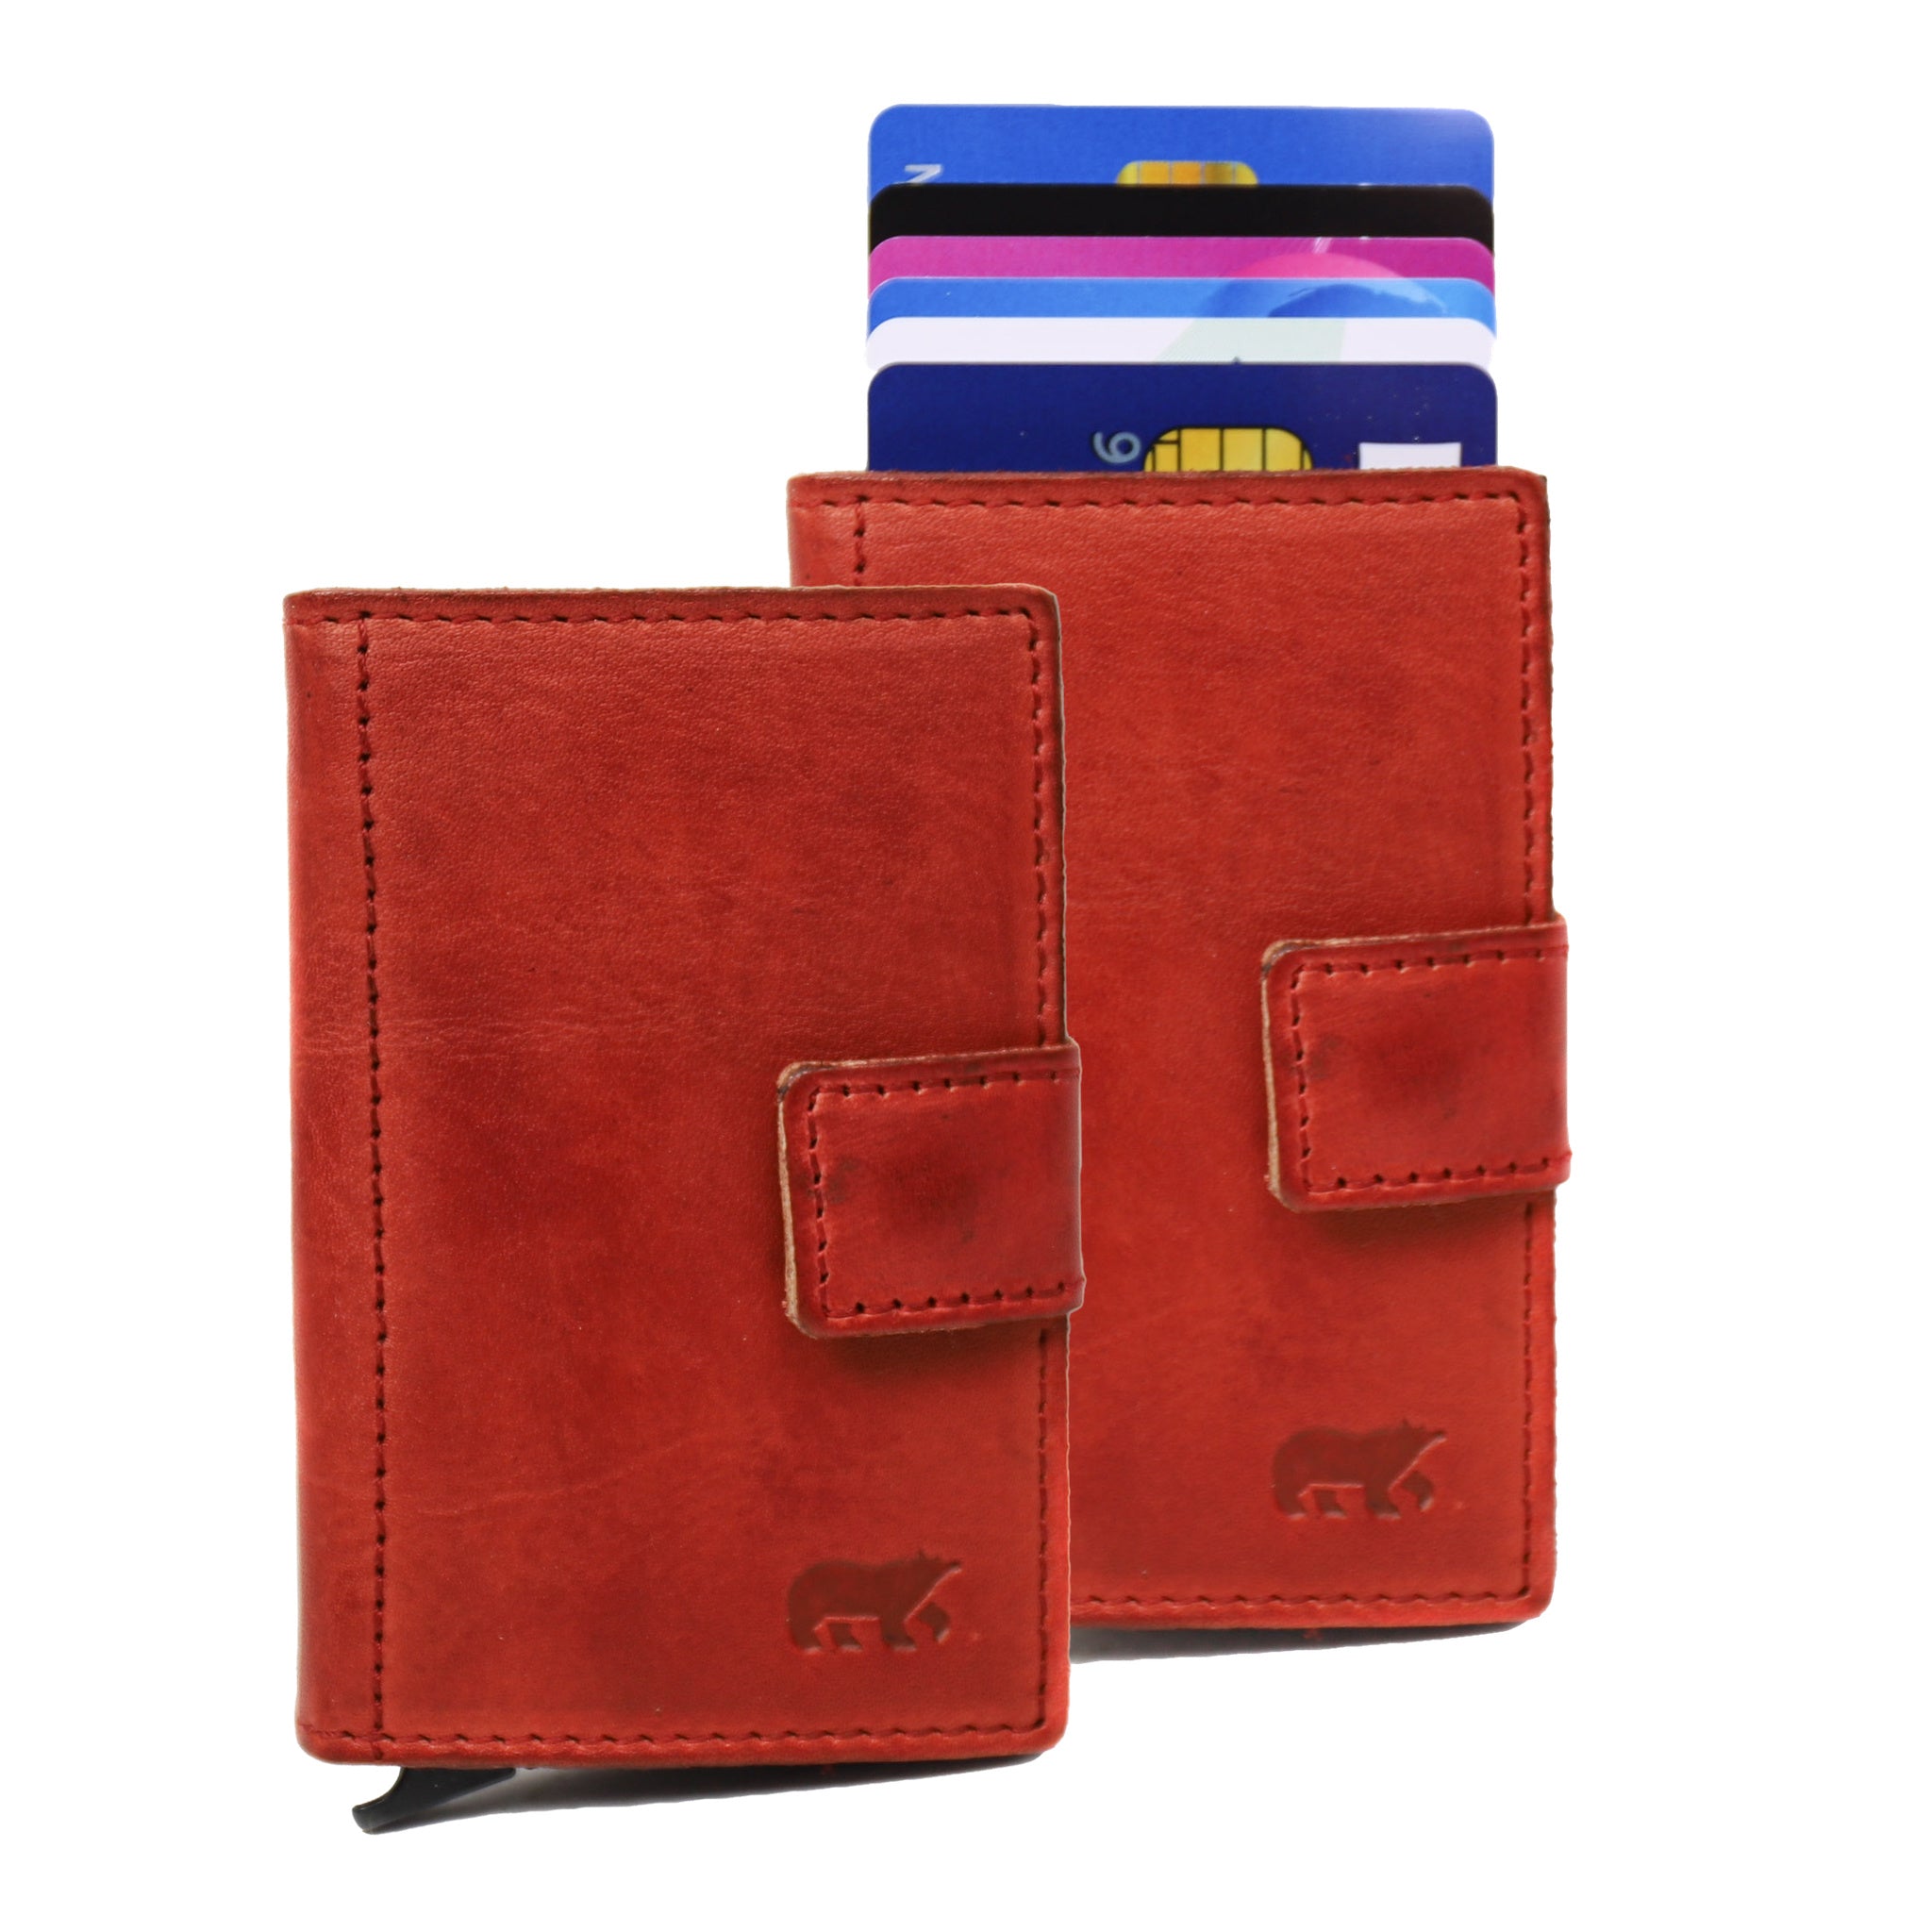 Card holder 'Pip' red - CL 15254